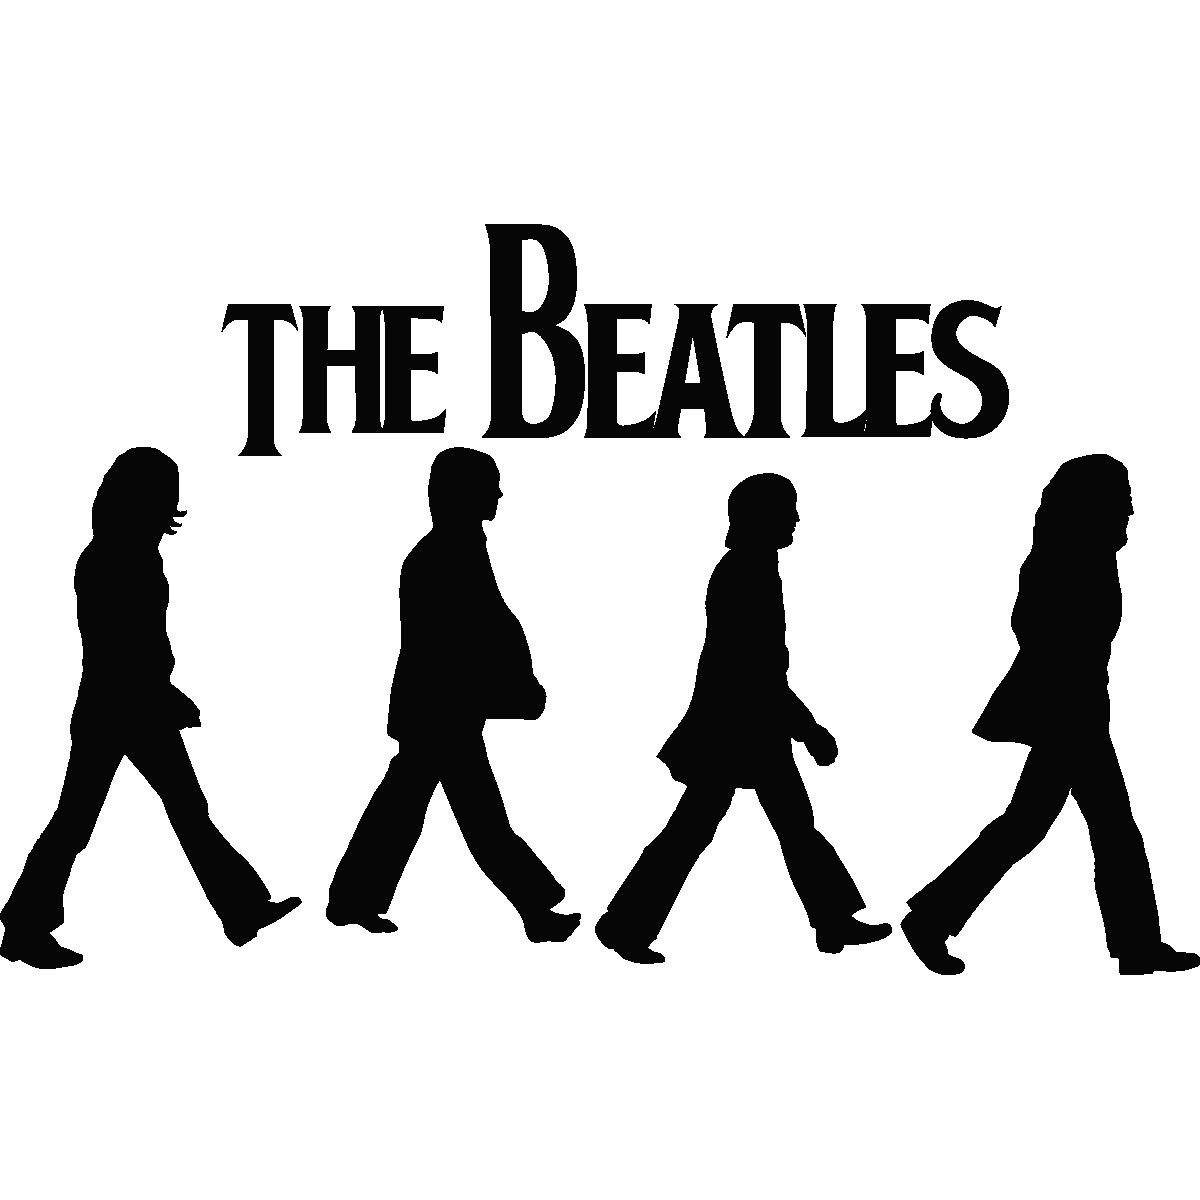 The Beatles Silhouettes on Abbey Road Black and White PNG icons